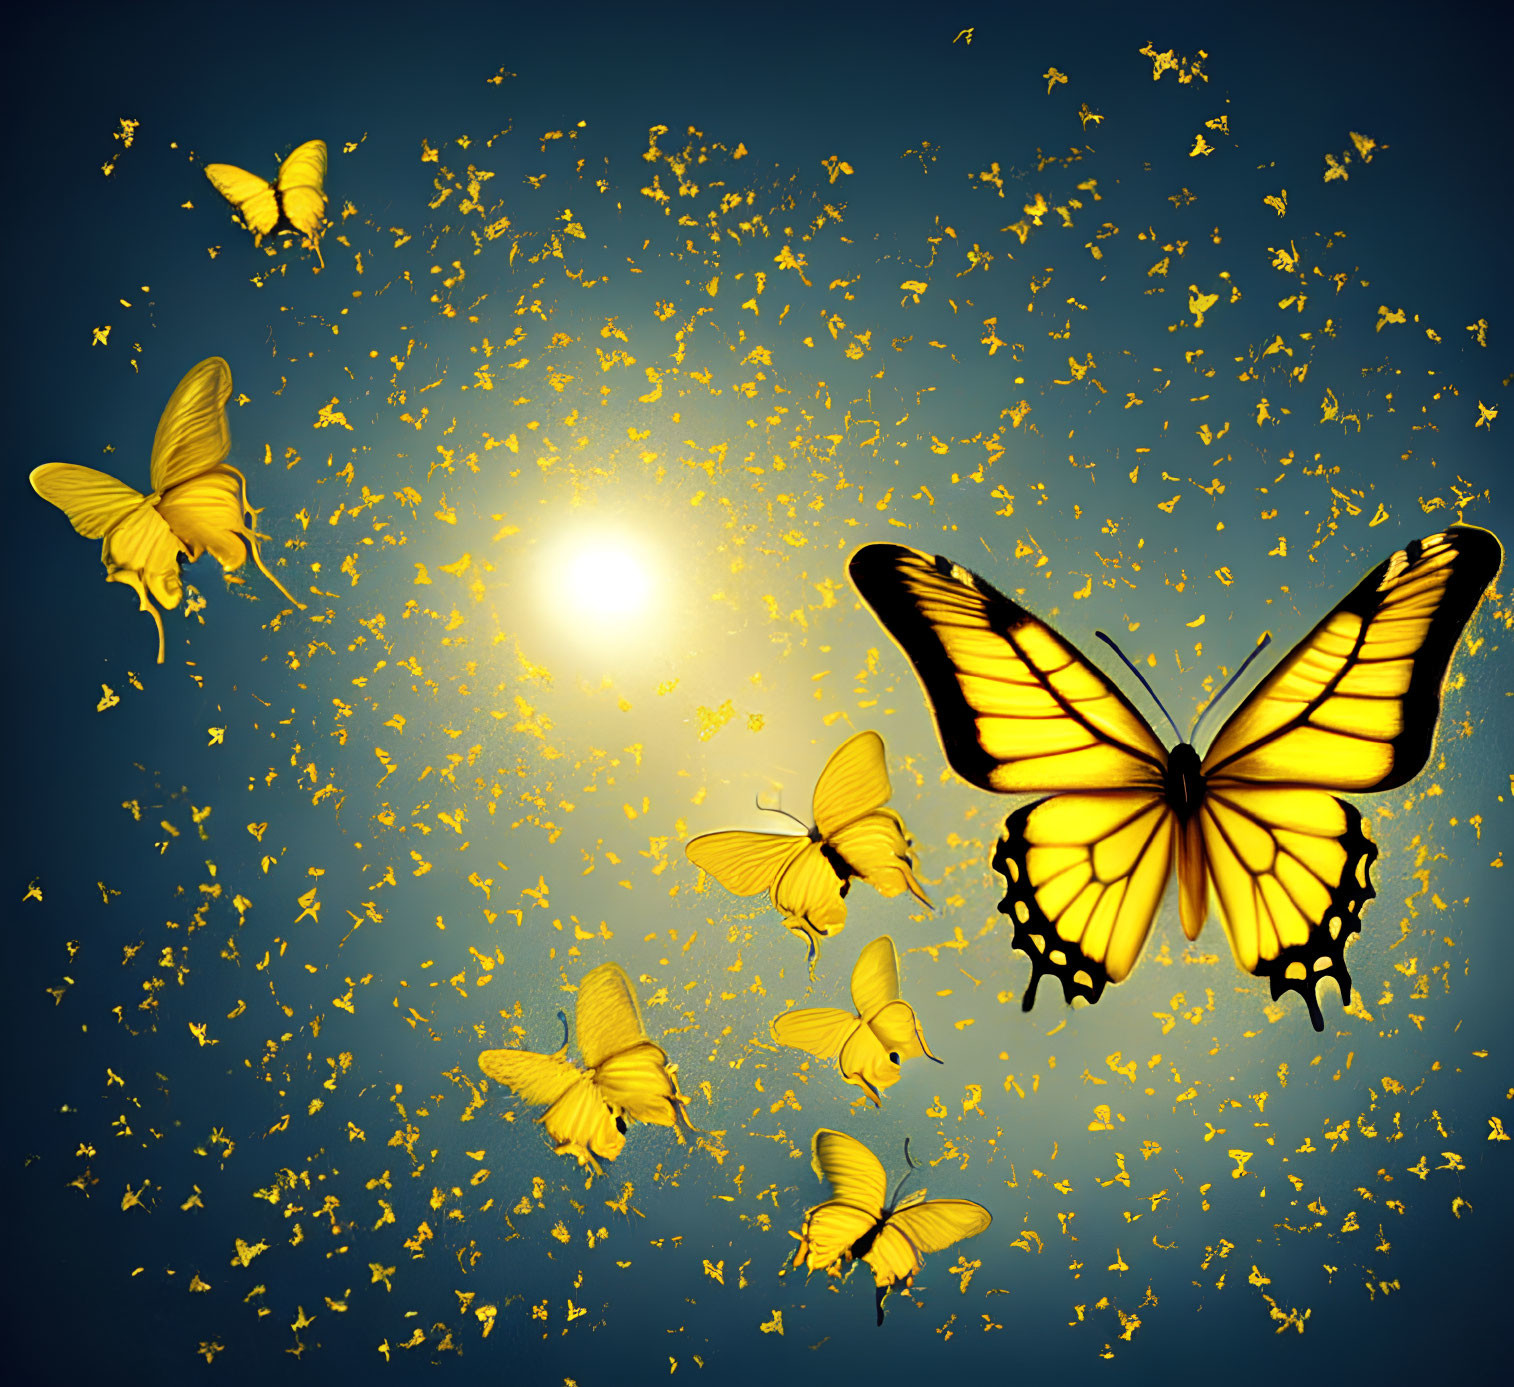 Vivid Yellow Butterflies Flying Towards Bright Light on Blue Background